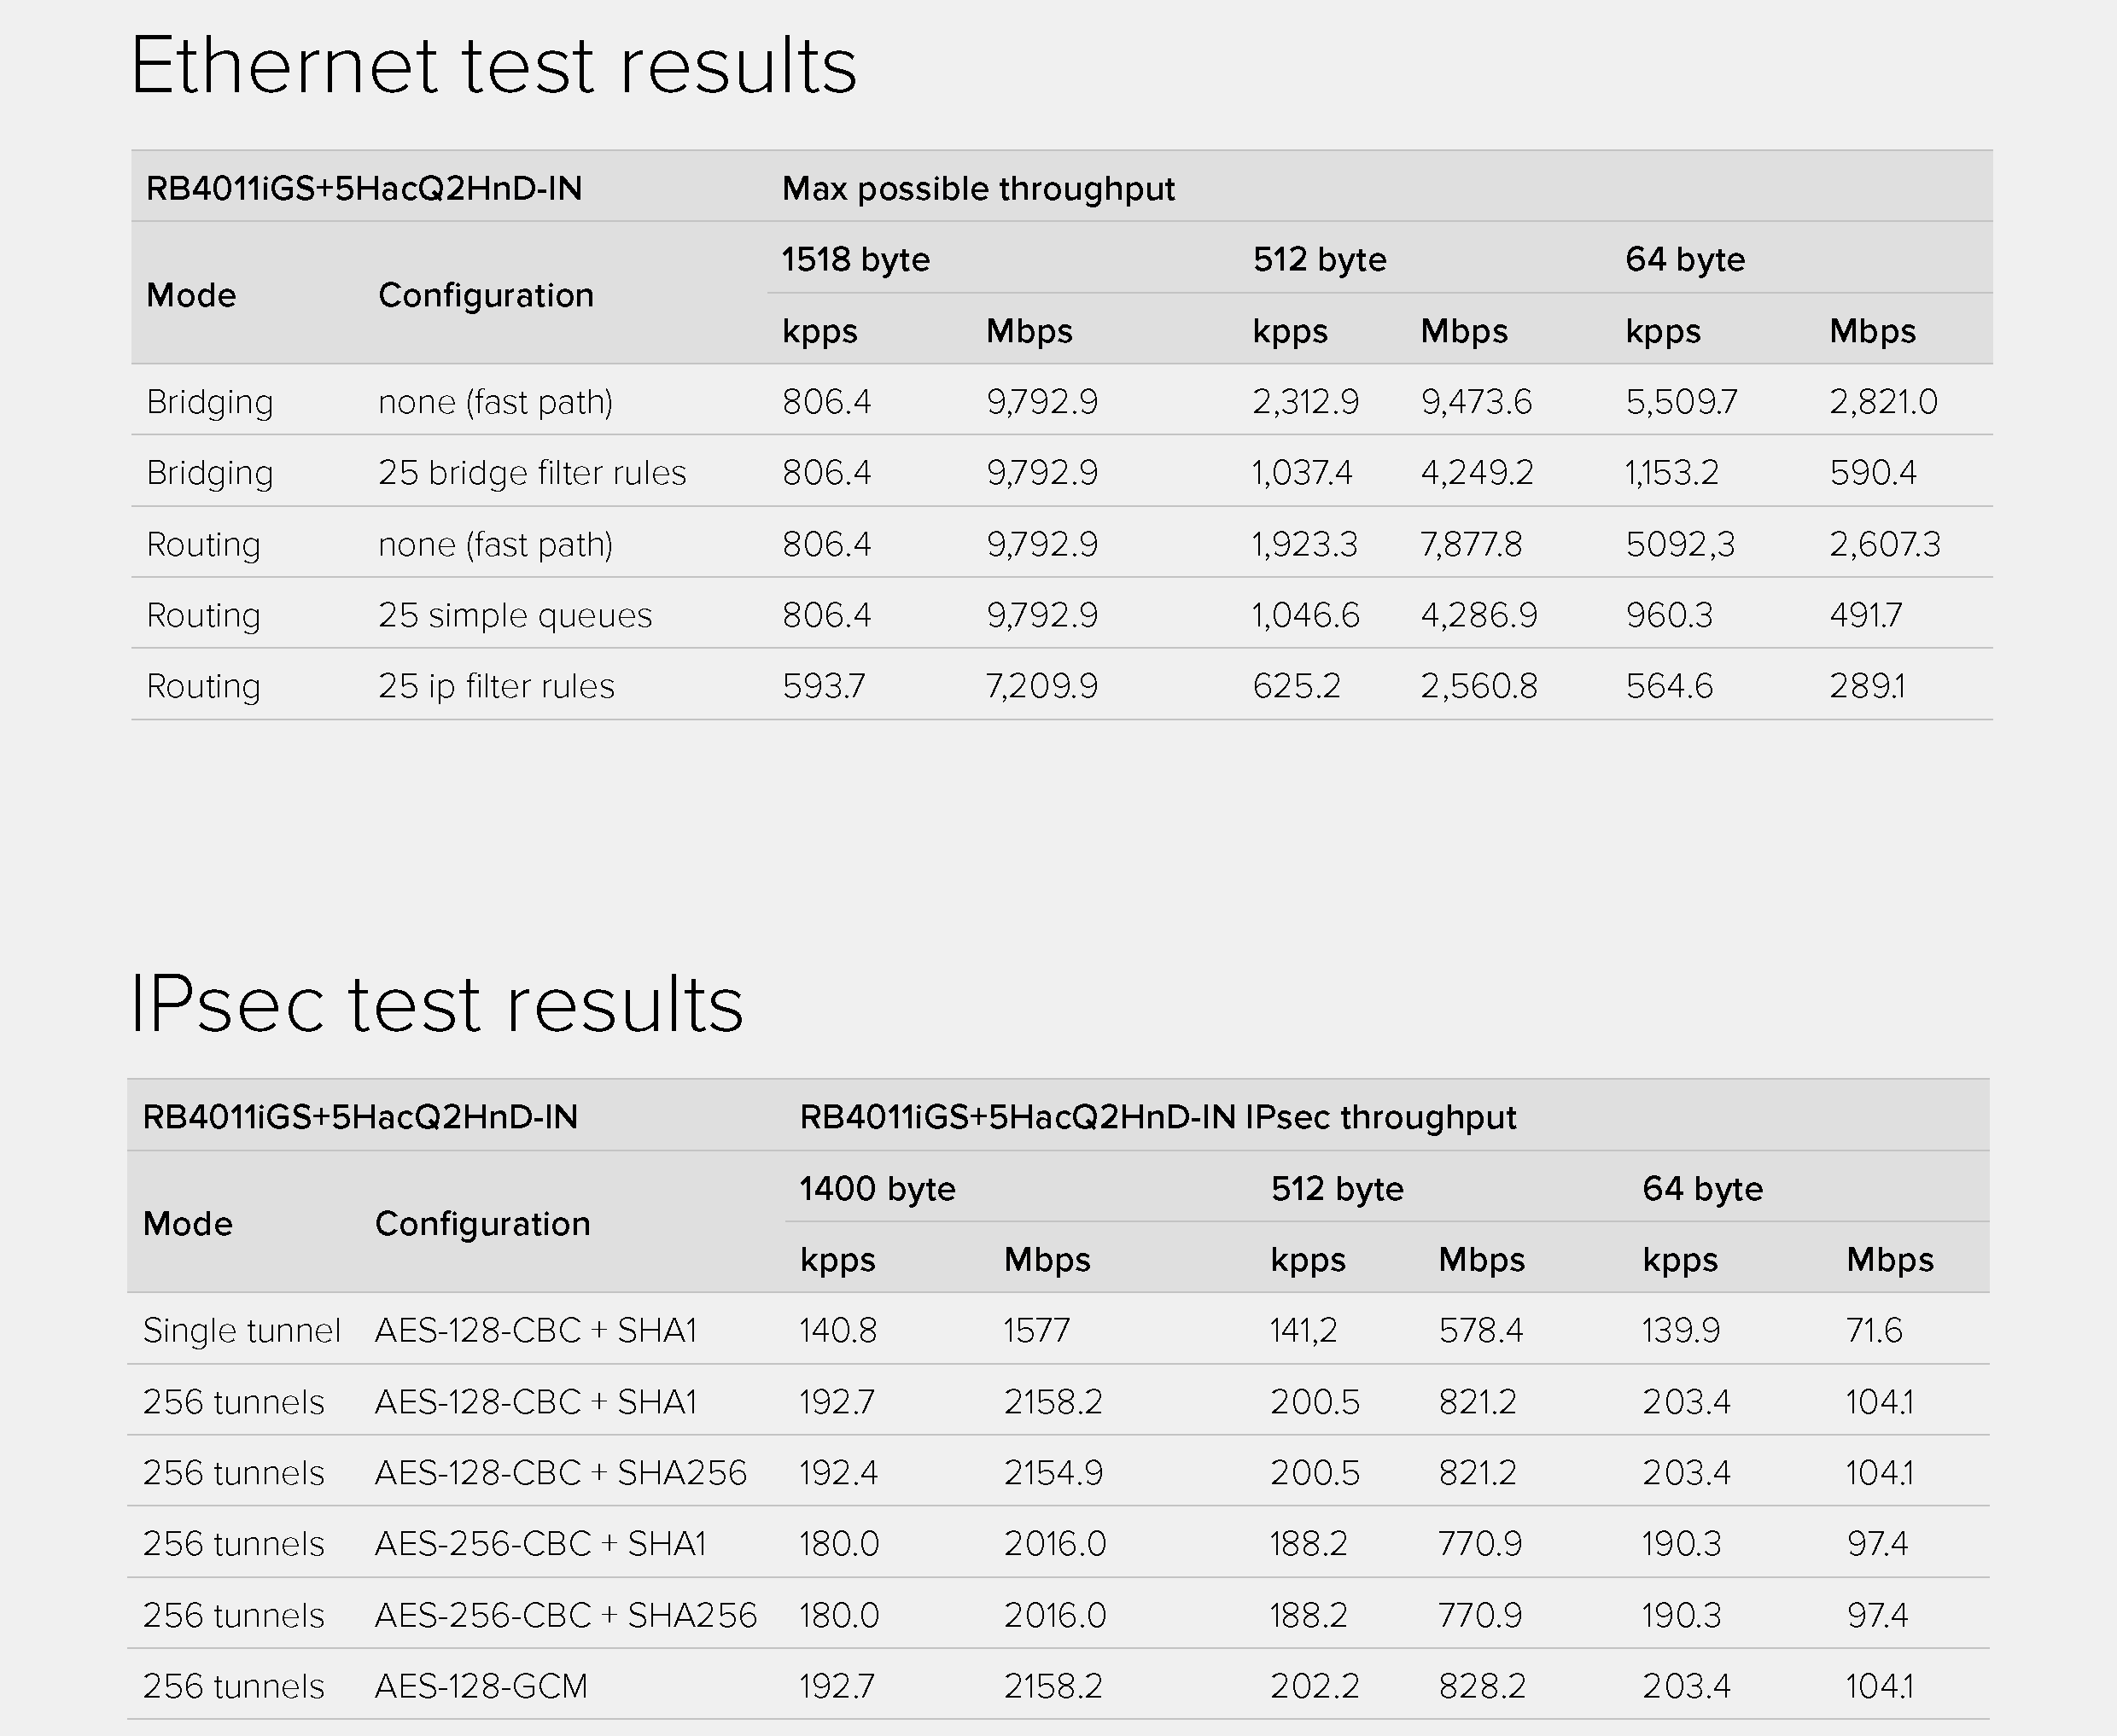 Performance Test Results